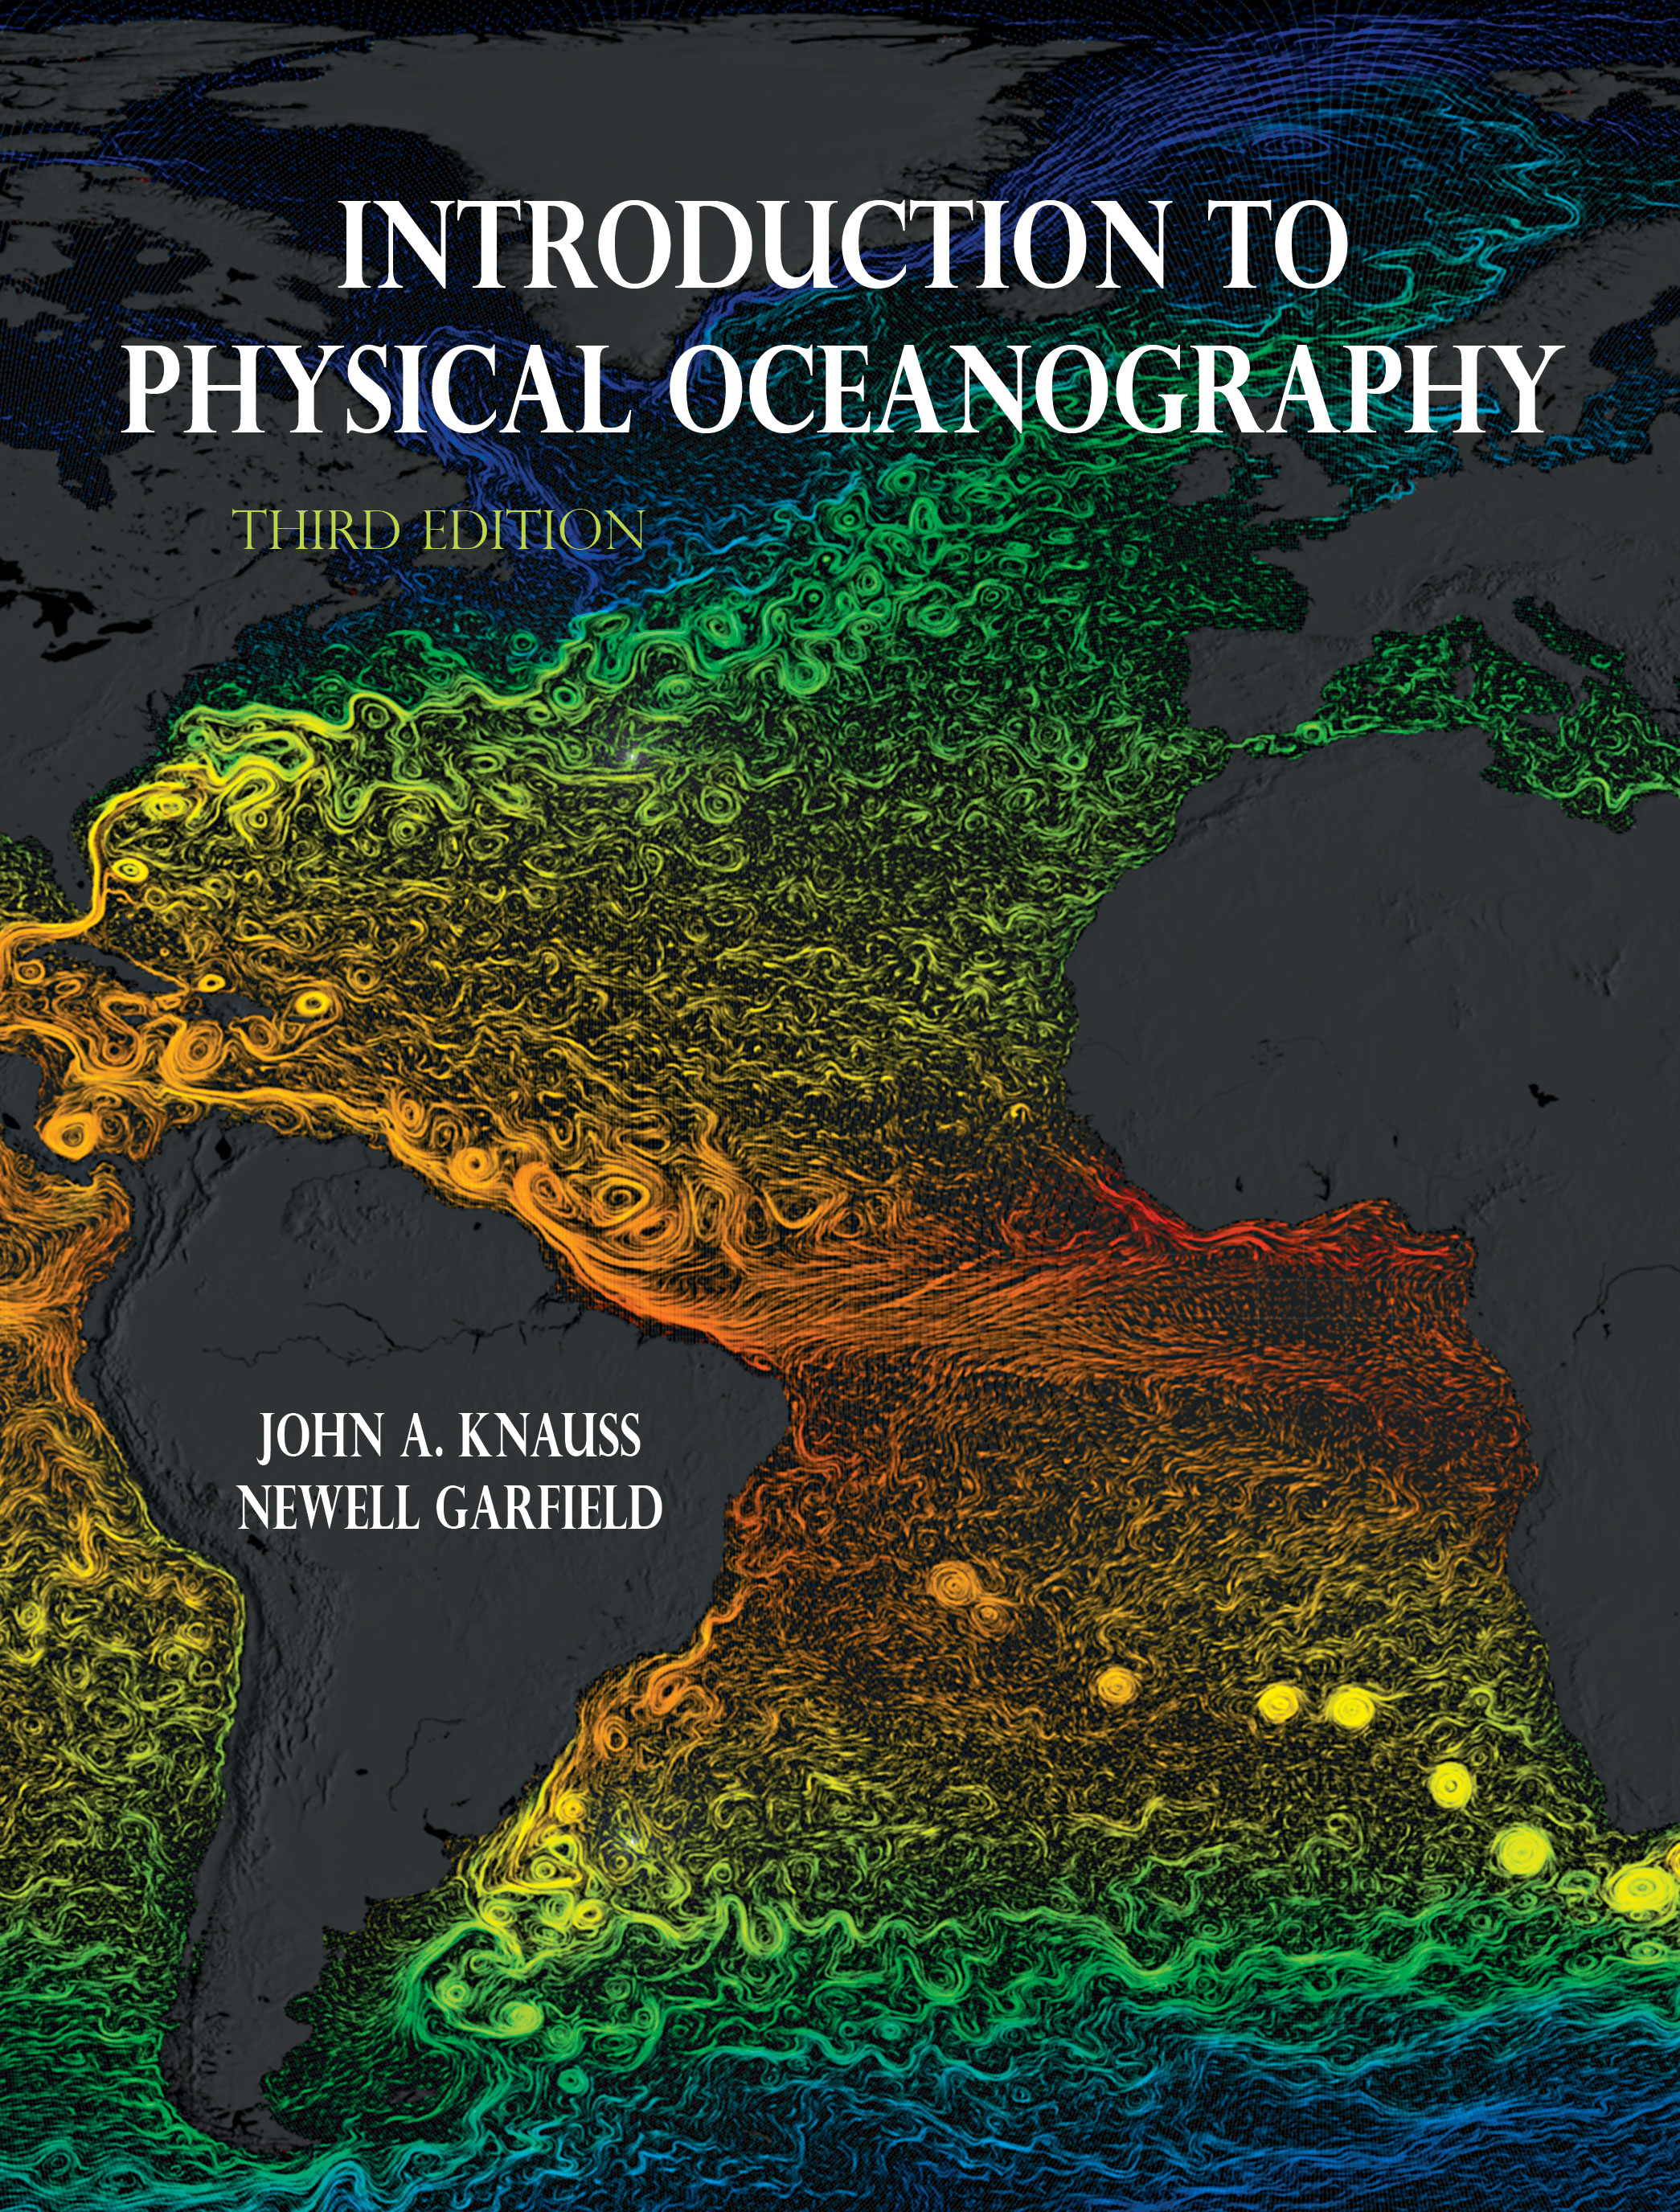 Introduction to Physical Oceanography: Third Edition by John A. Knauss, Newell  Garfield